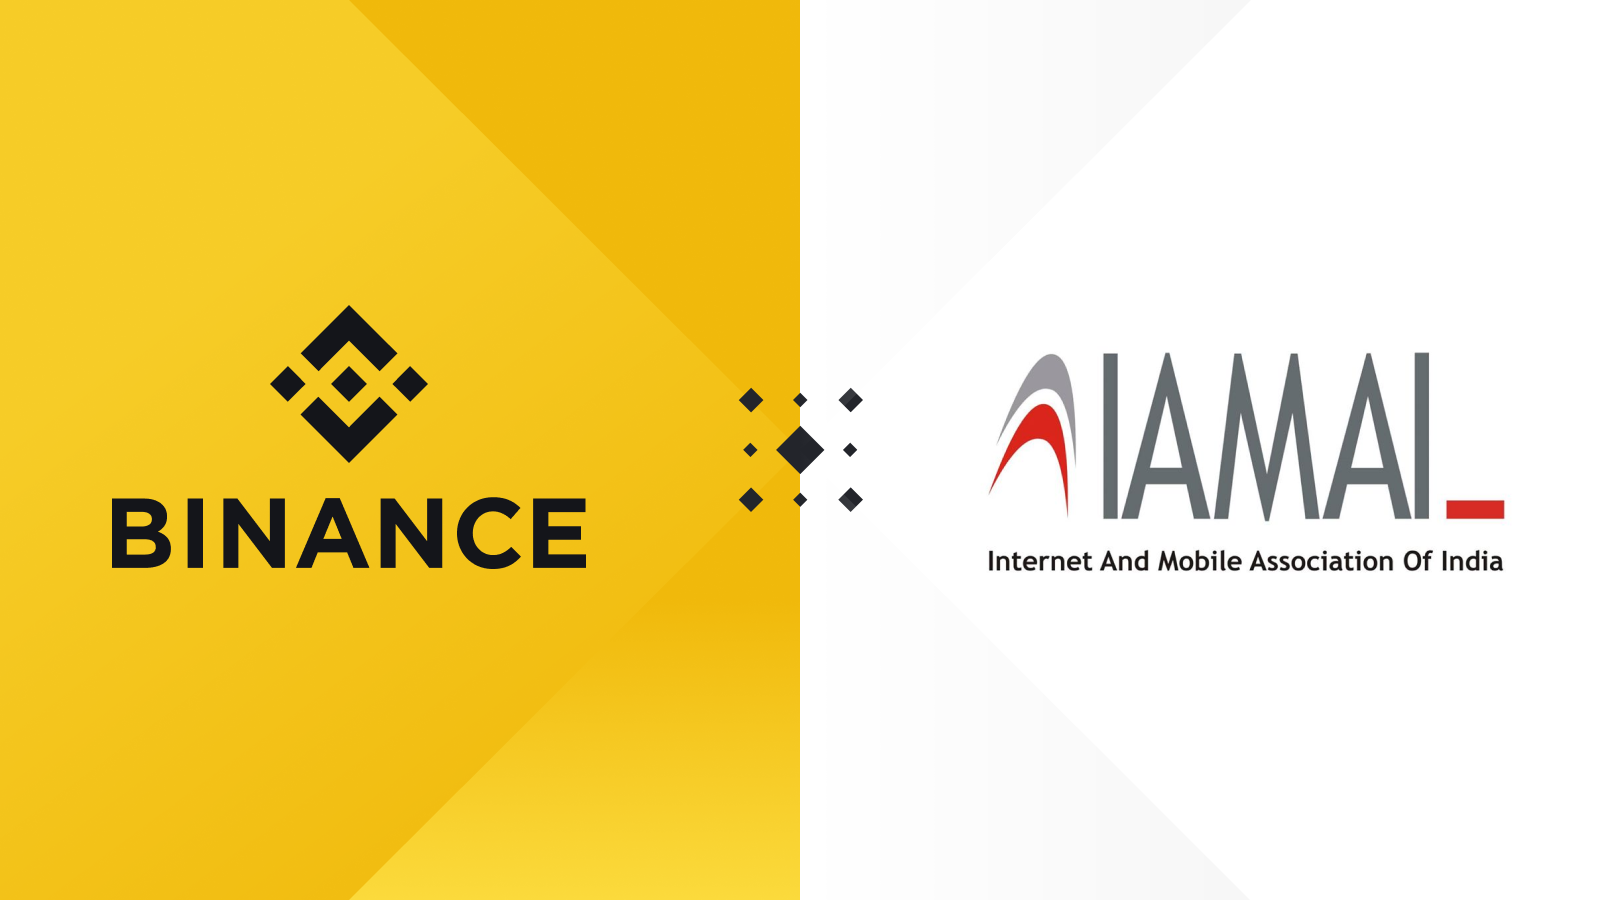 Binance Joins the Internet and Mobile Association of India ...